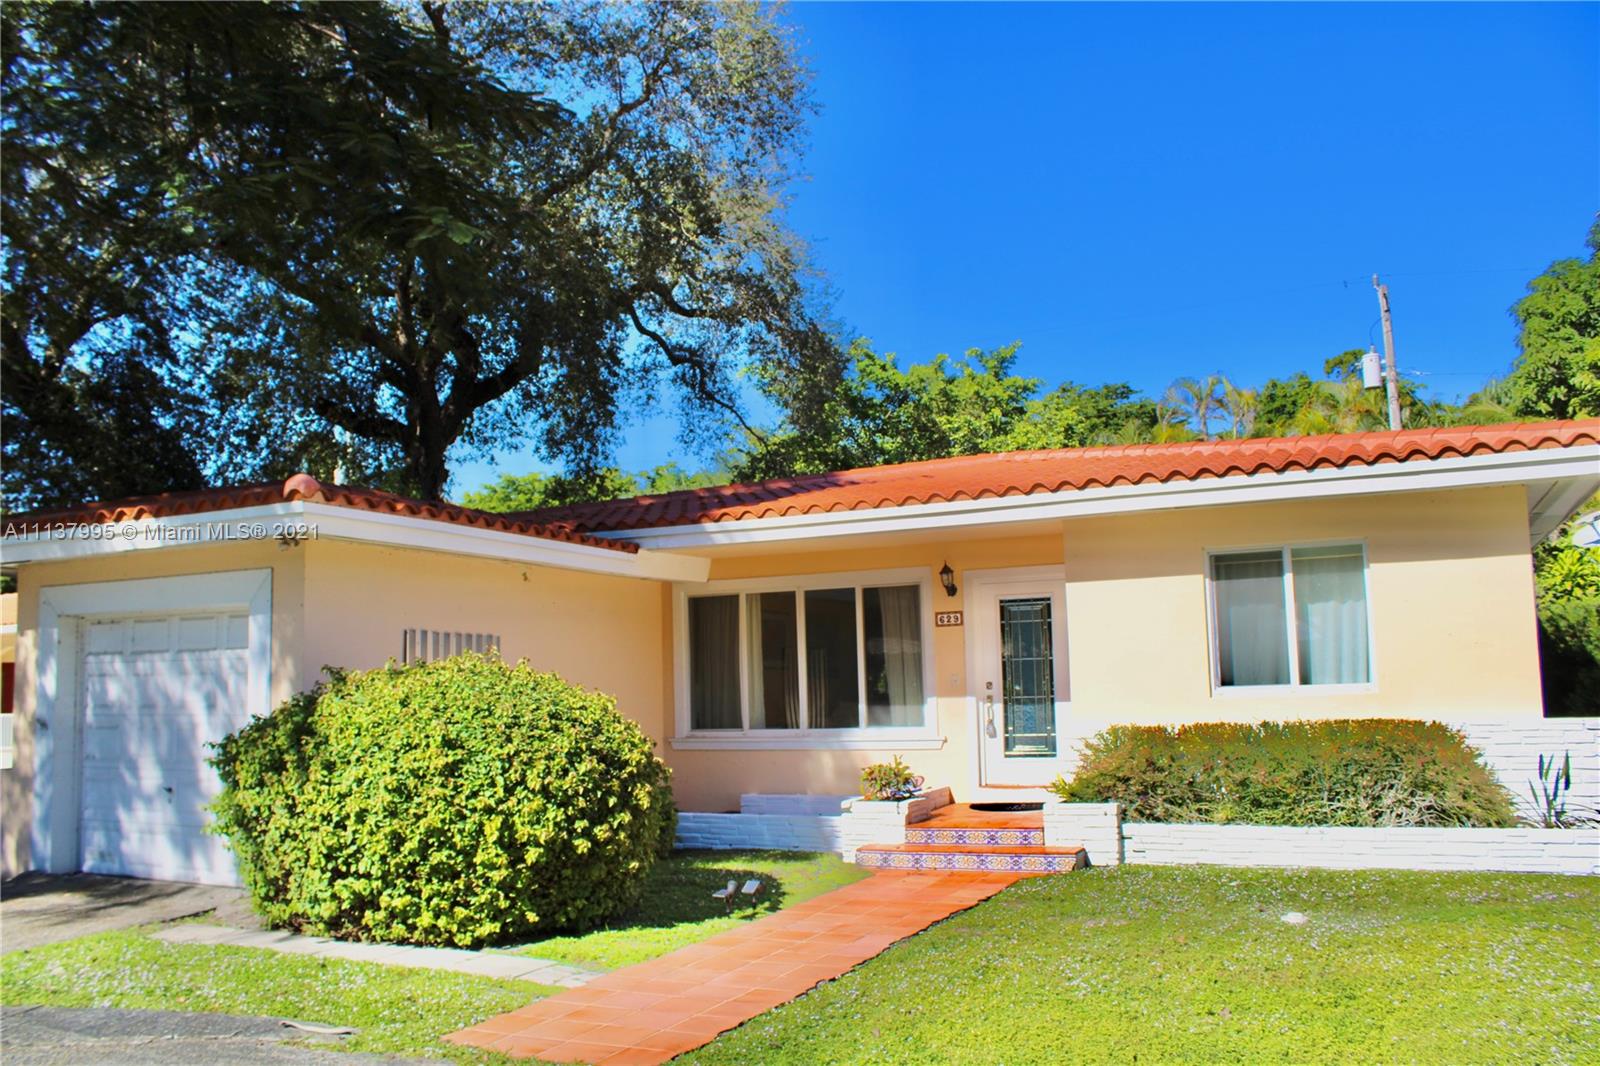 Mid Century Modern, located in The Coral Gables Country Club Subdivision. Spacious 3/2 with New roof and Impact Windows and doors. Beautiful hardwood floors with a spacious floor plan. A great room ideal for all occasions & full of light. A tree-filled patio area ready for grilling or lounging. Close to Merrick Place the University of Miami and   Miracle Mile. Centrally located to all of the venues Miami Has to offer.